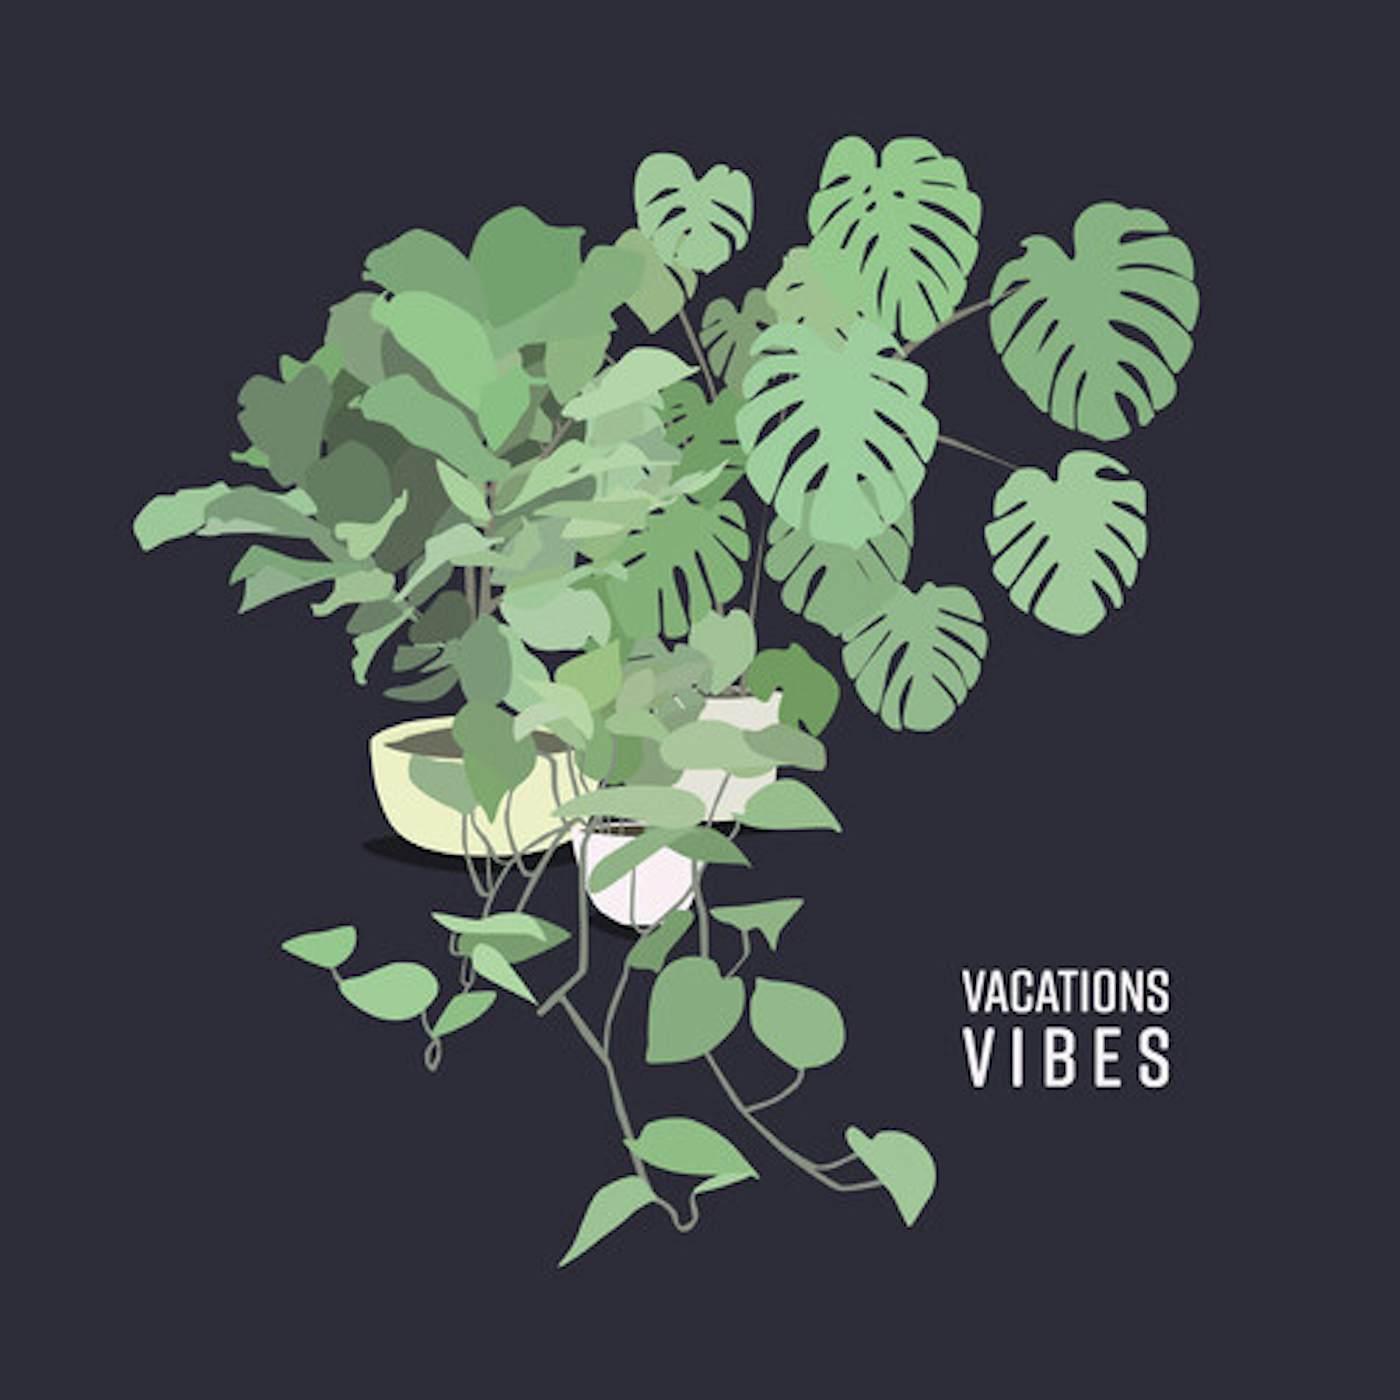 Vacations VIBES CD